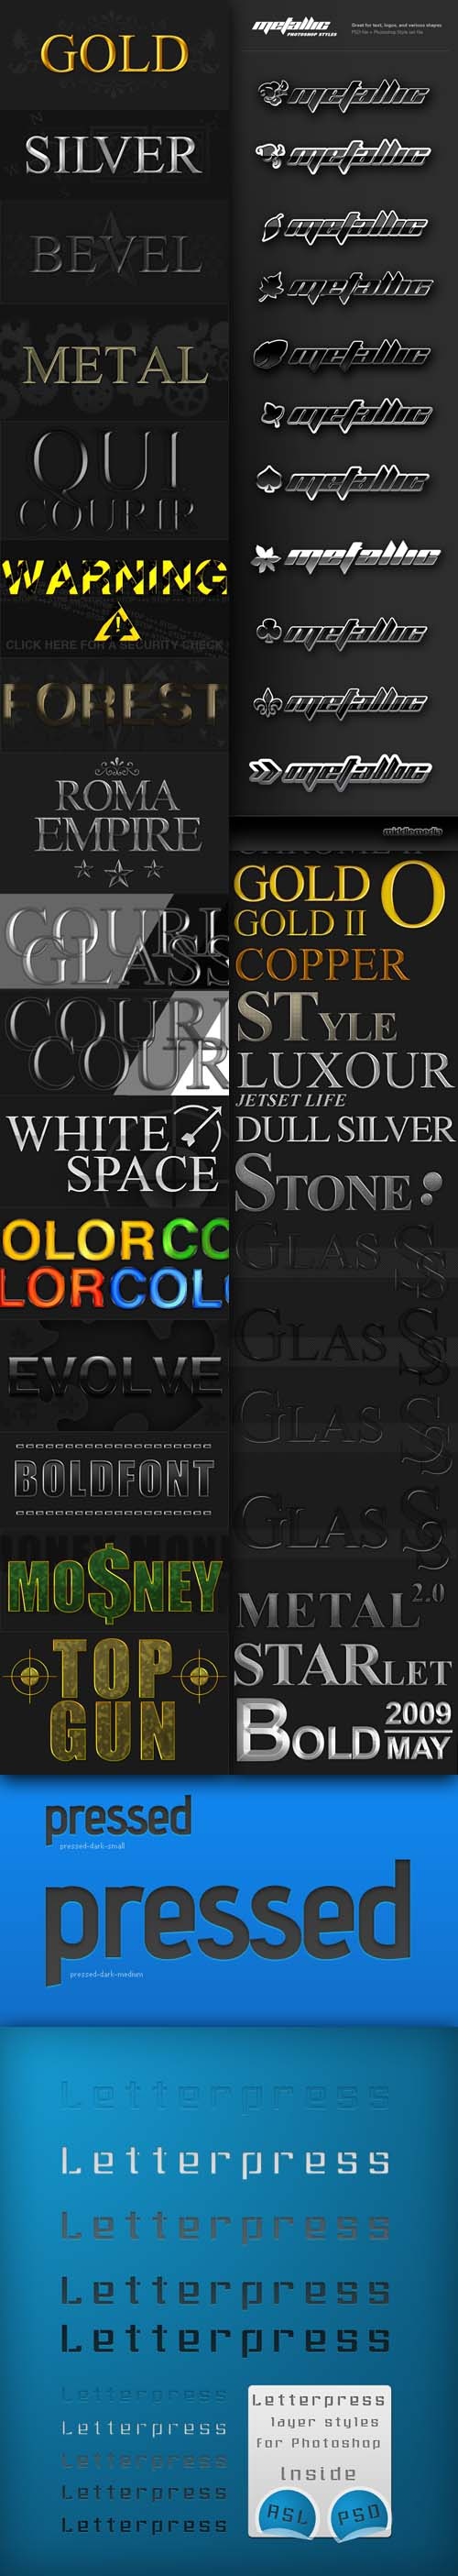 A collection of styles for Photoshop